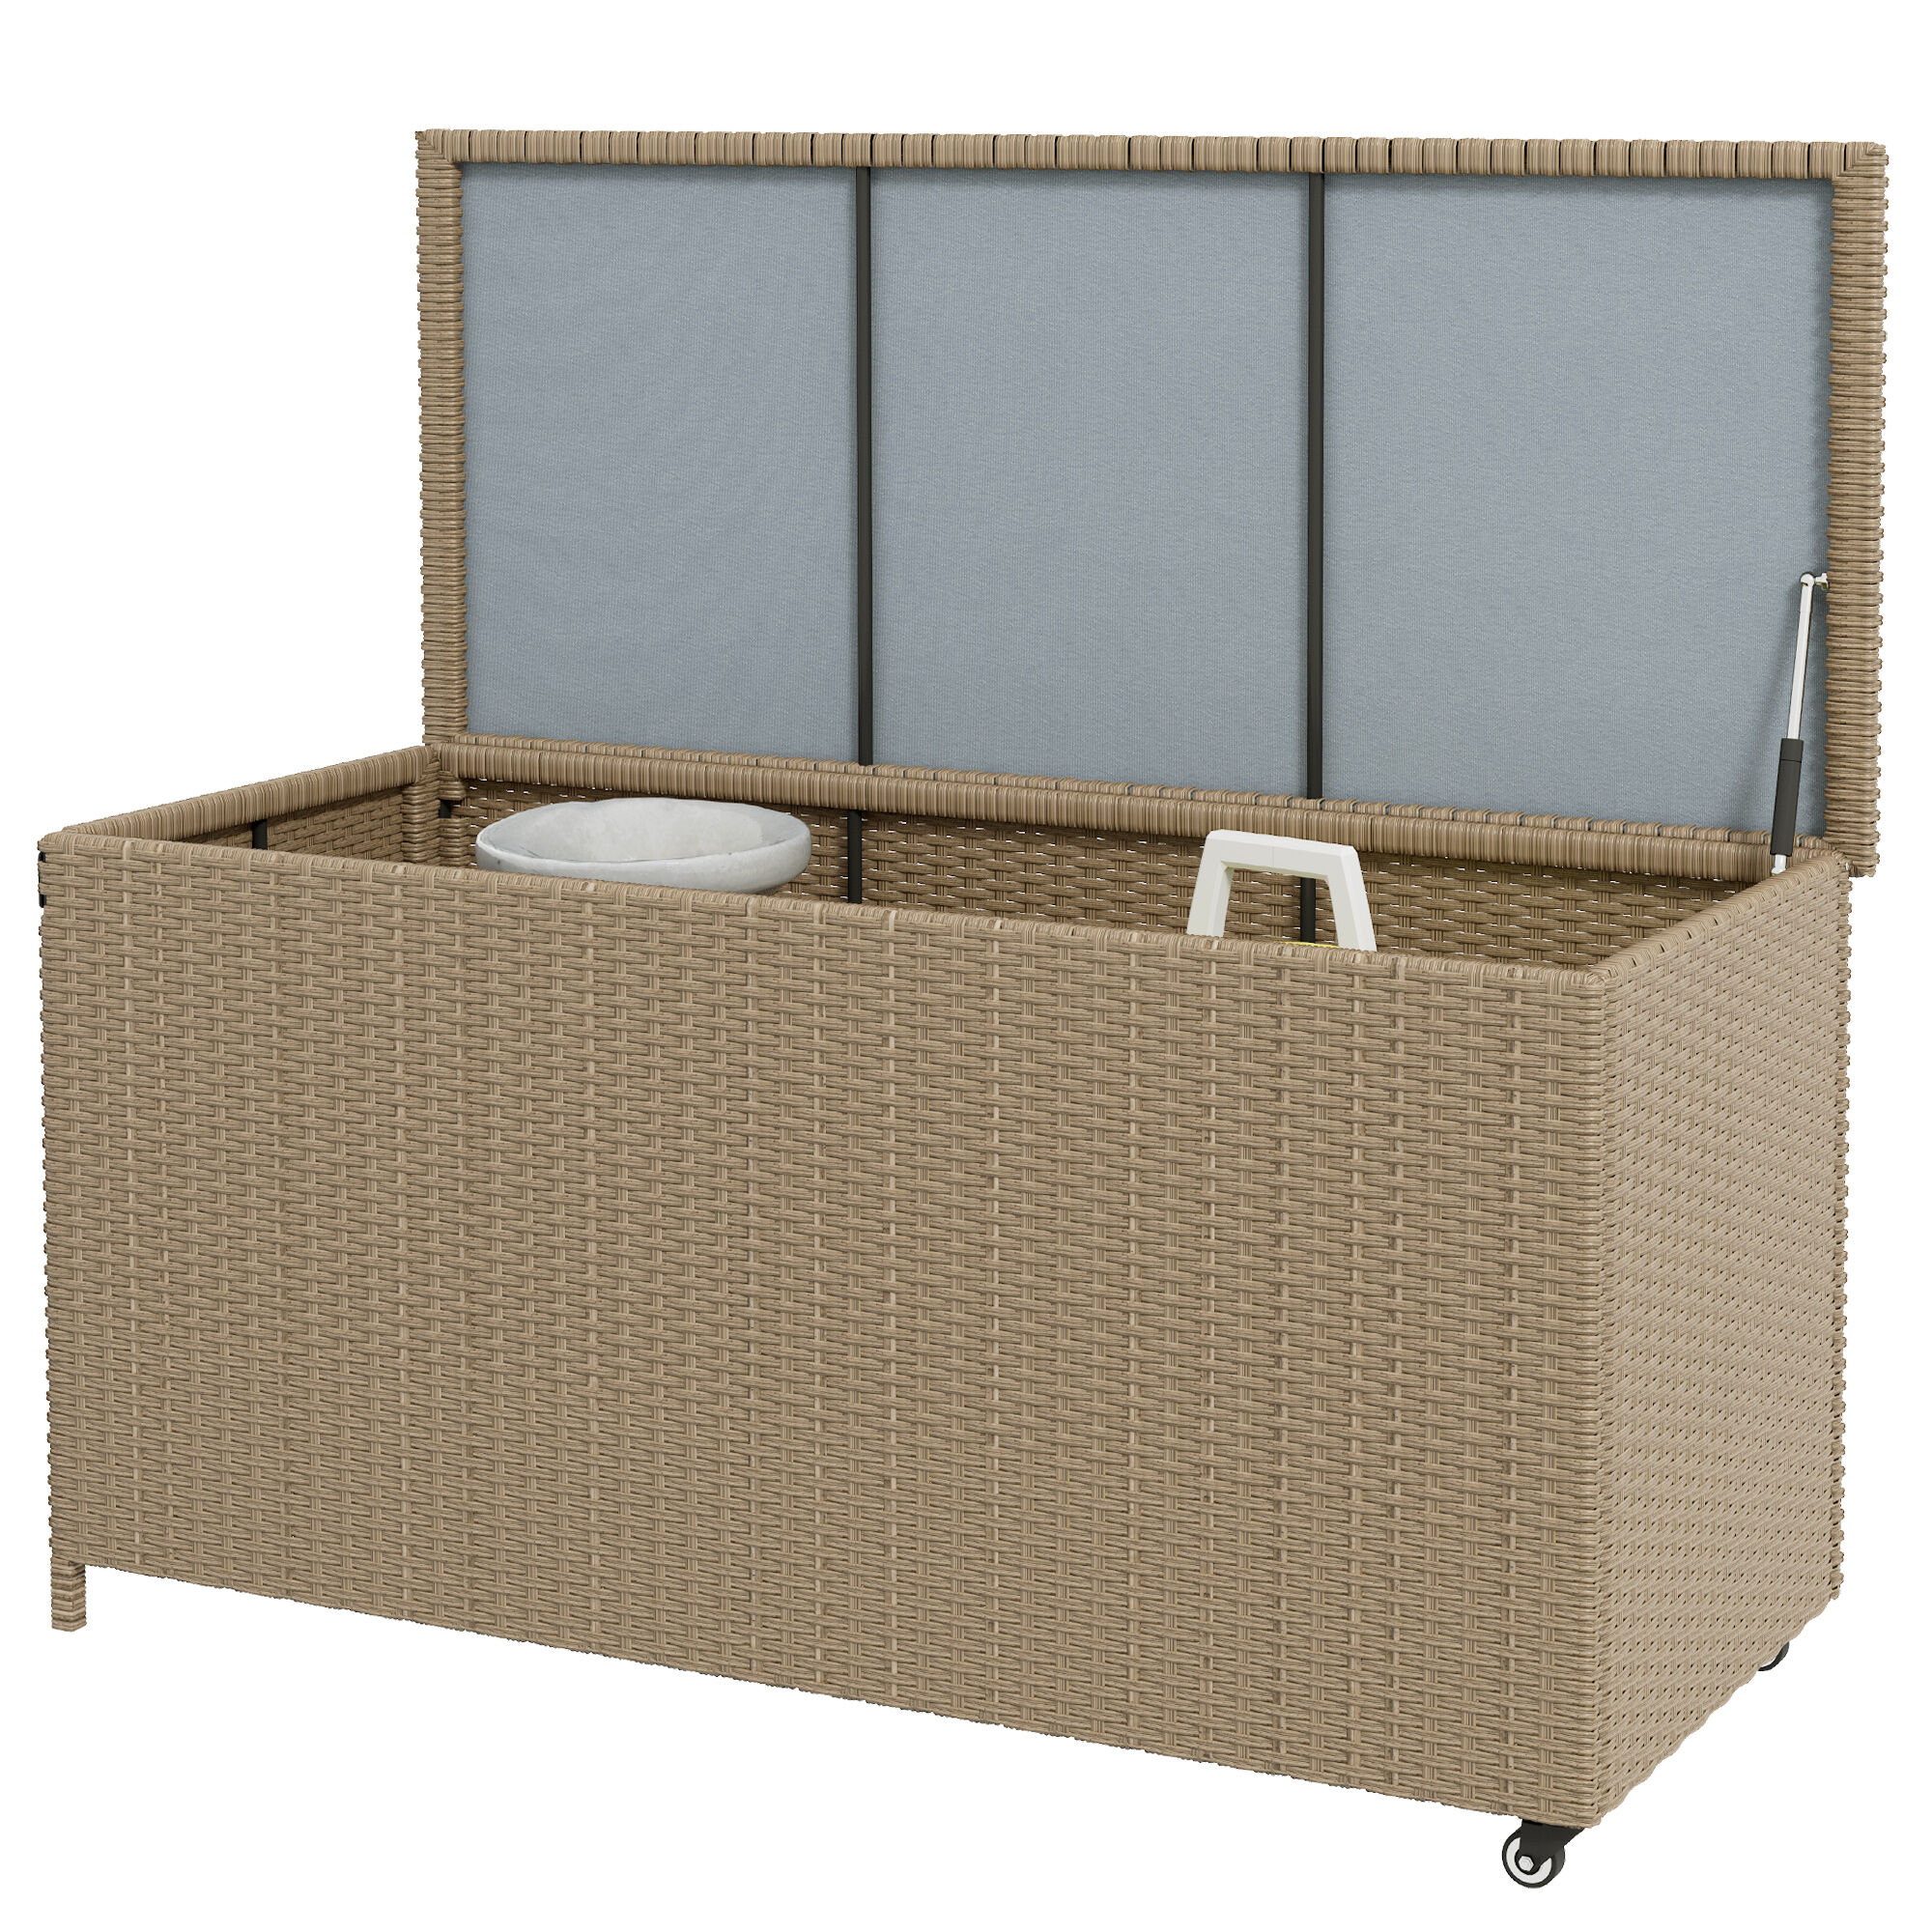 Outsunny 83 Gallon Rolling Deck Box Brown PE Wicker Outdoor Storage Chest Garden Tools Pool Toys Wheels   Aosom.com